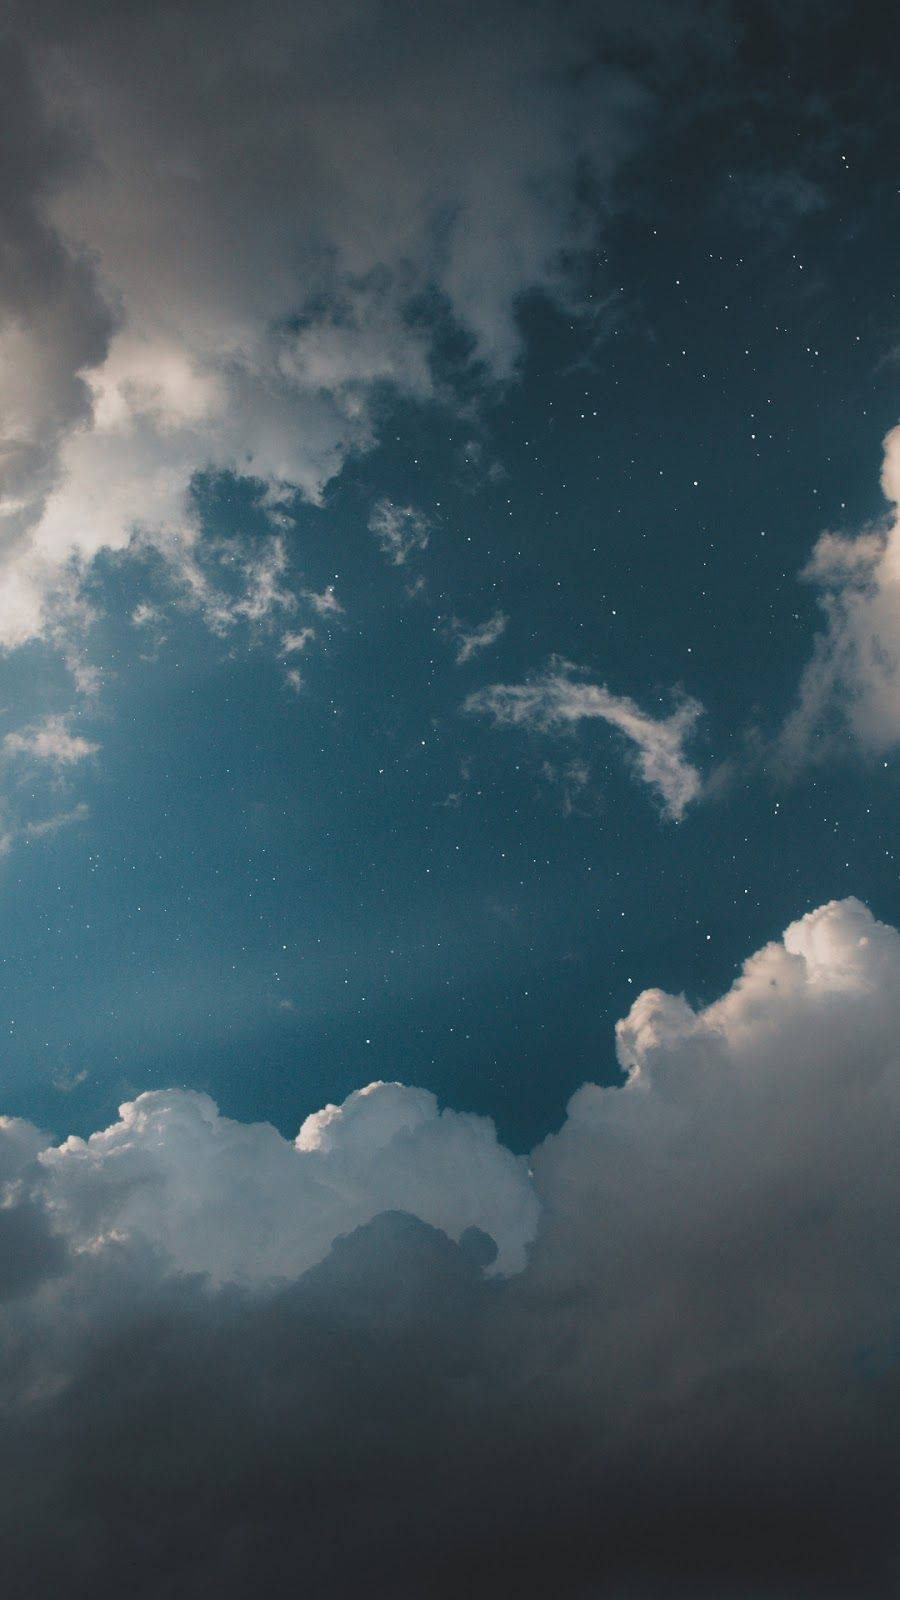 Whatsapp Chat Stars And Clouds Background